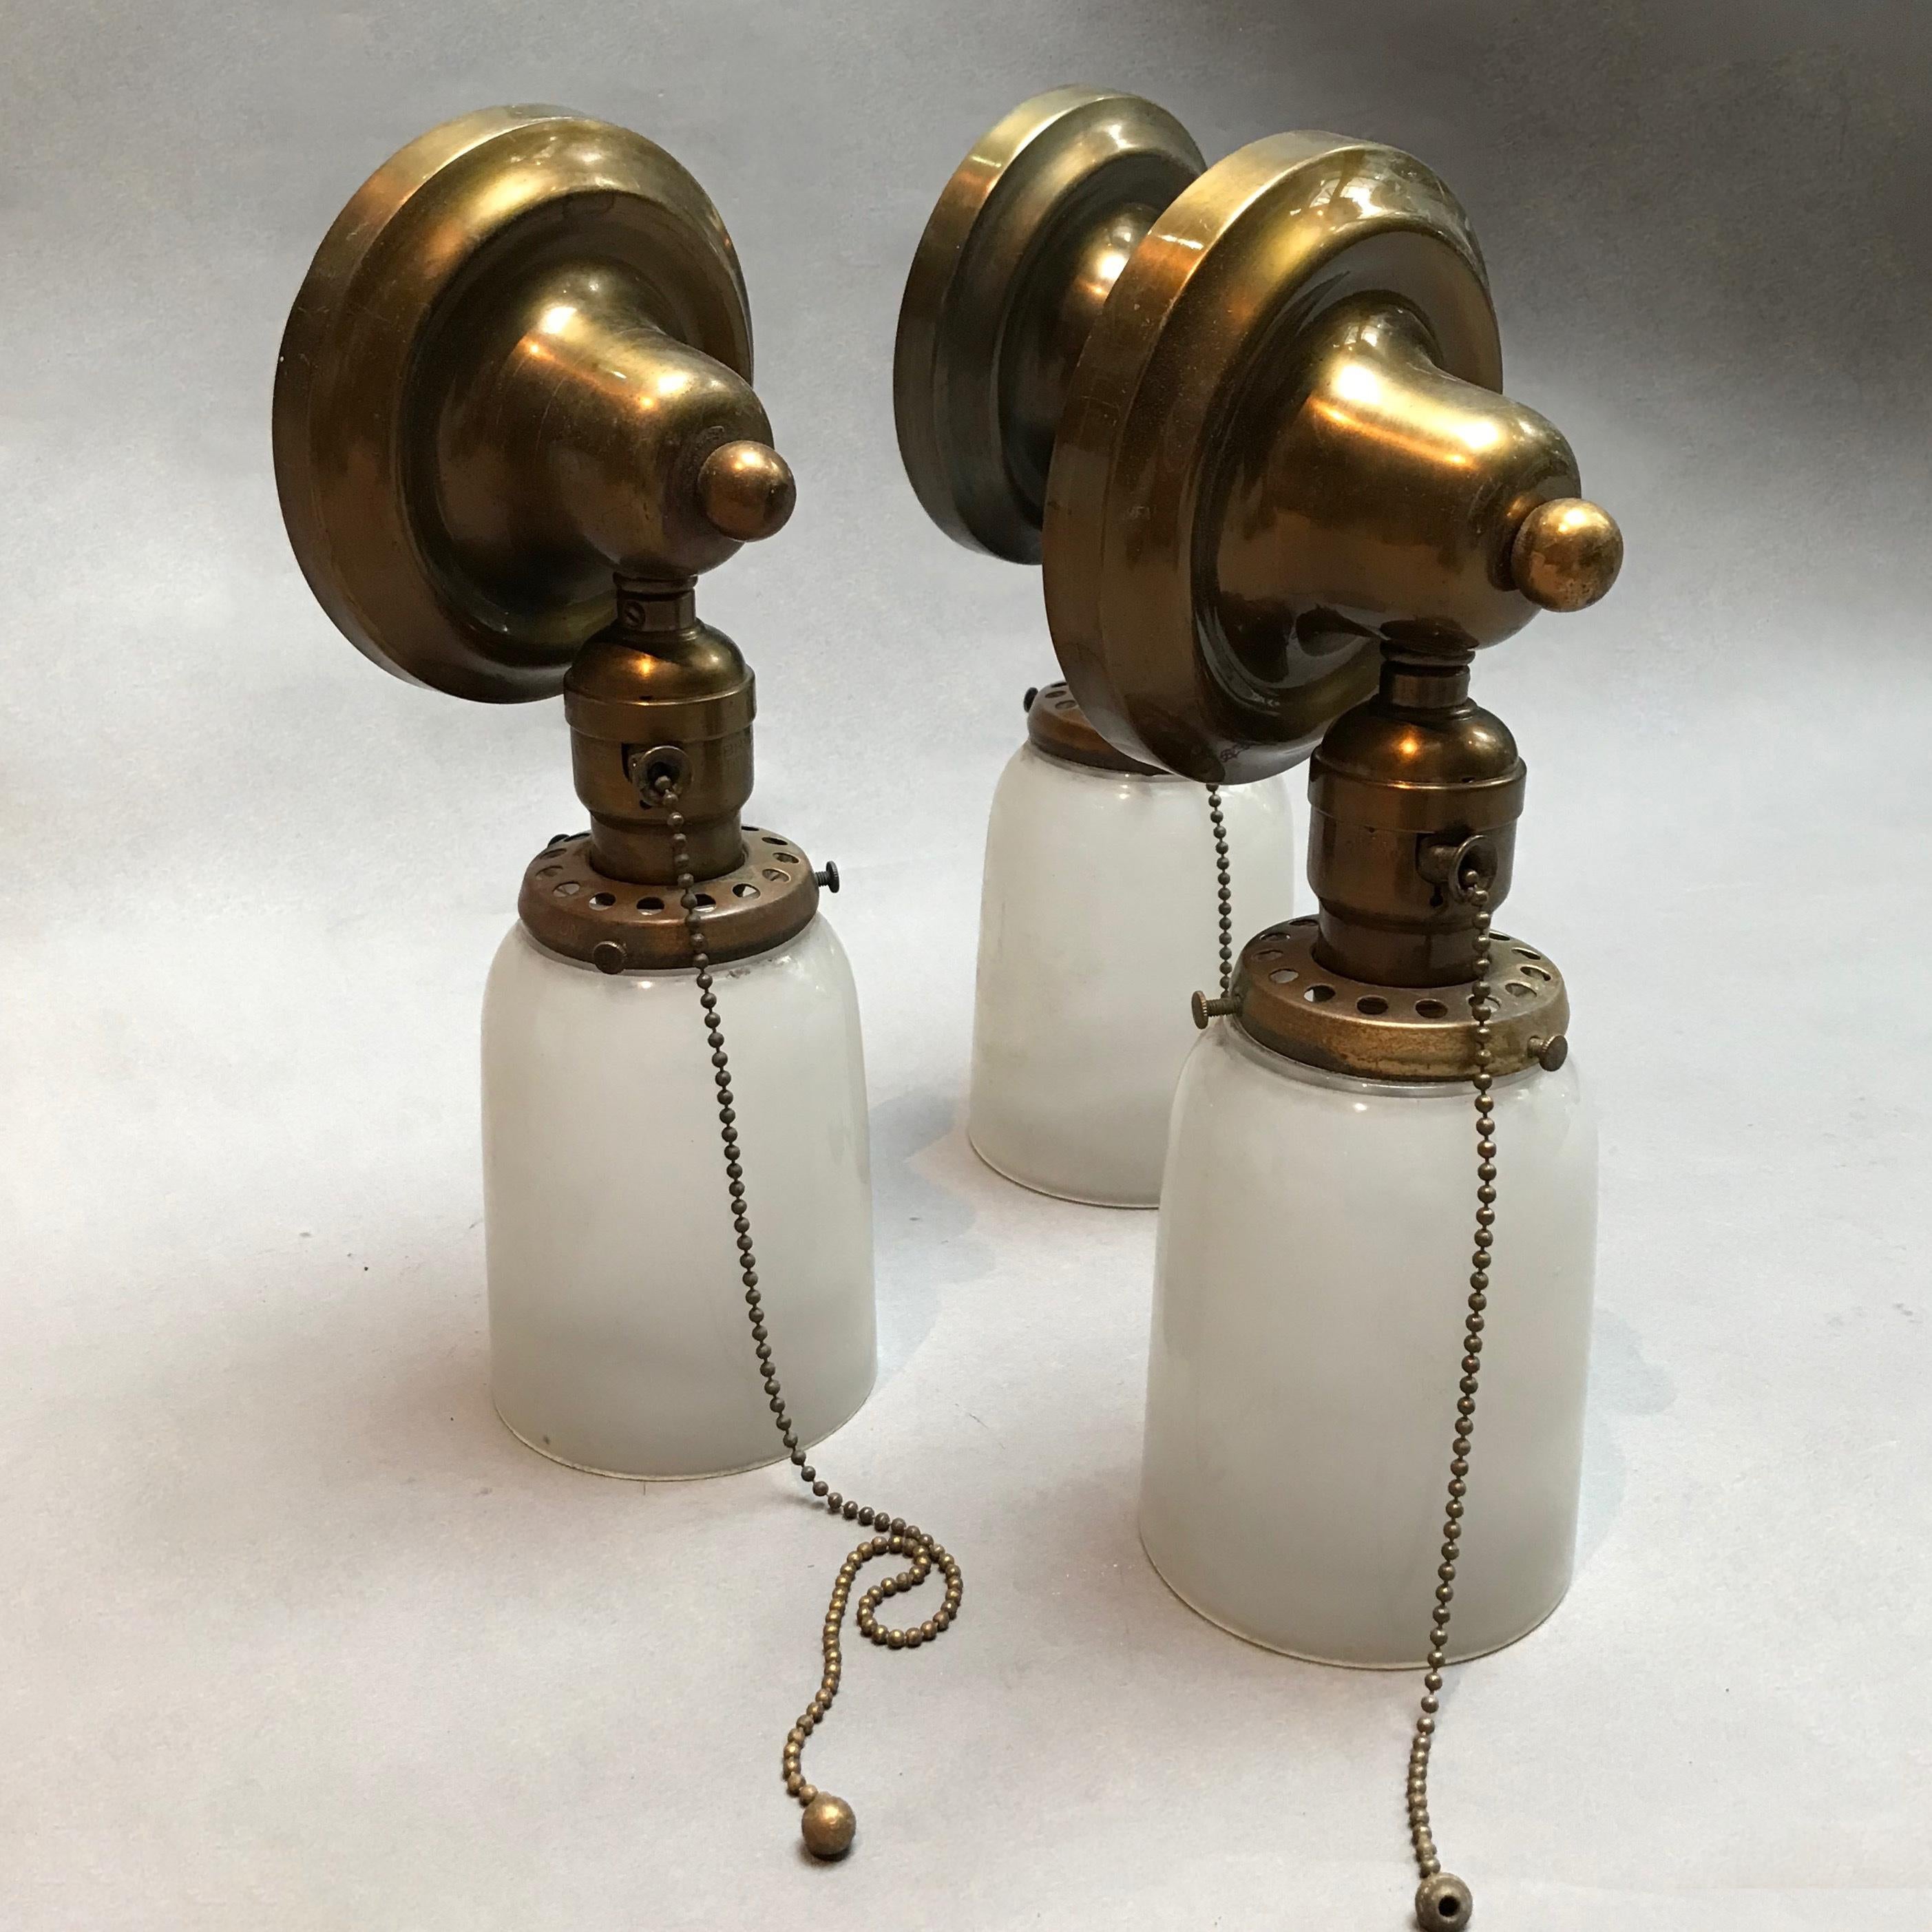 American Brass and Frosted Glass Wall Sconce Lights